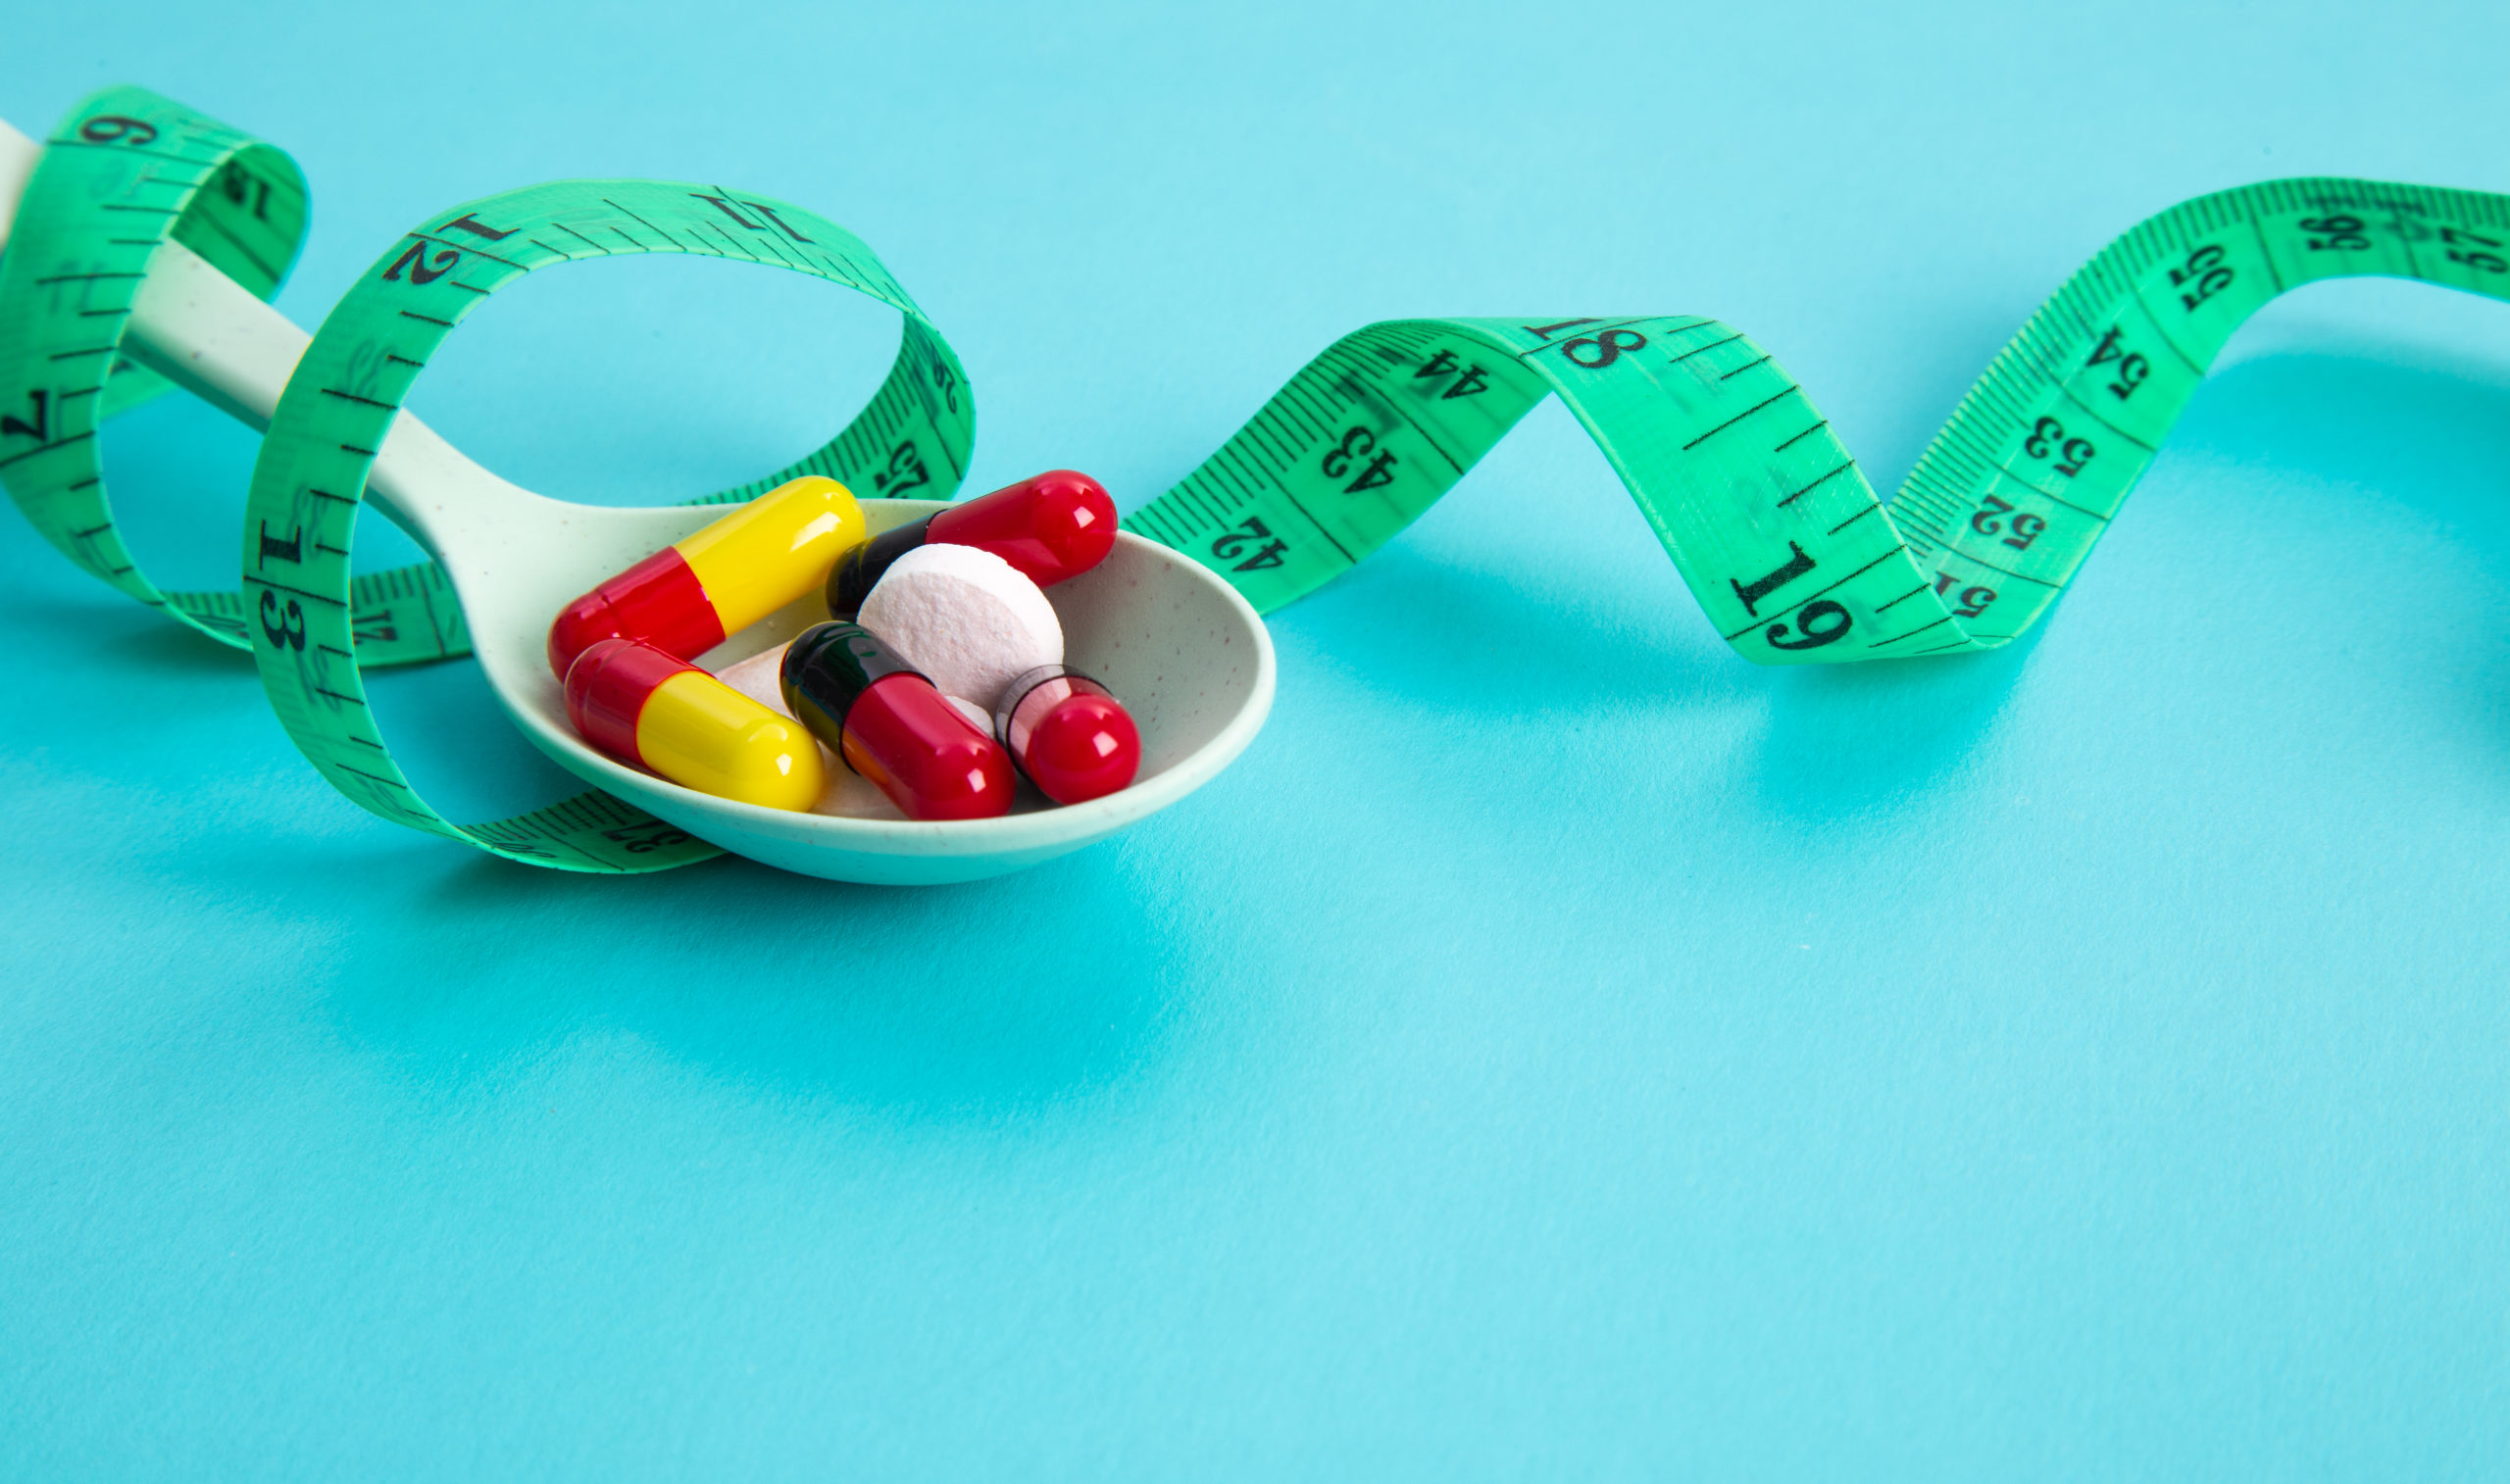 diet pills and measuring tape